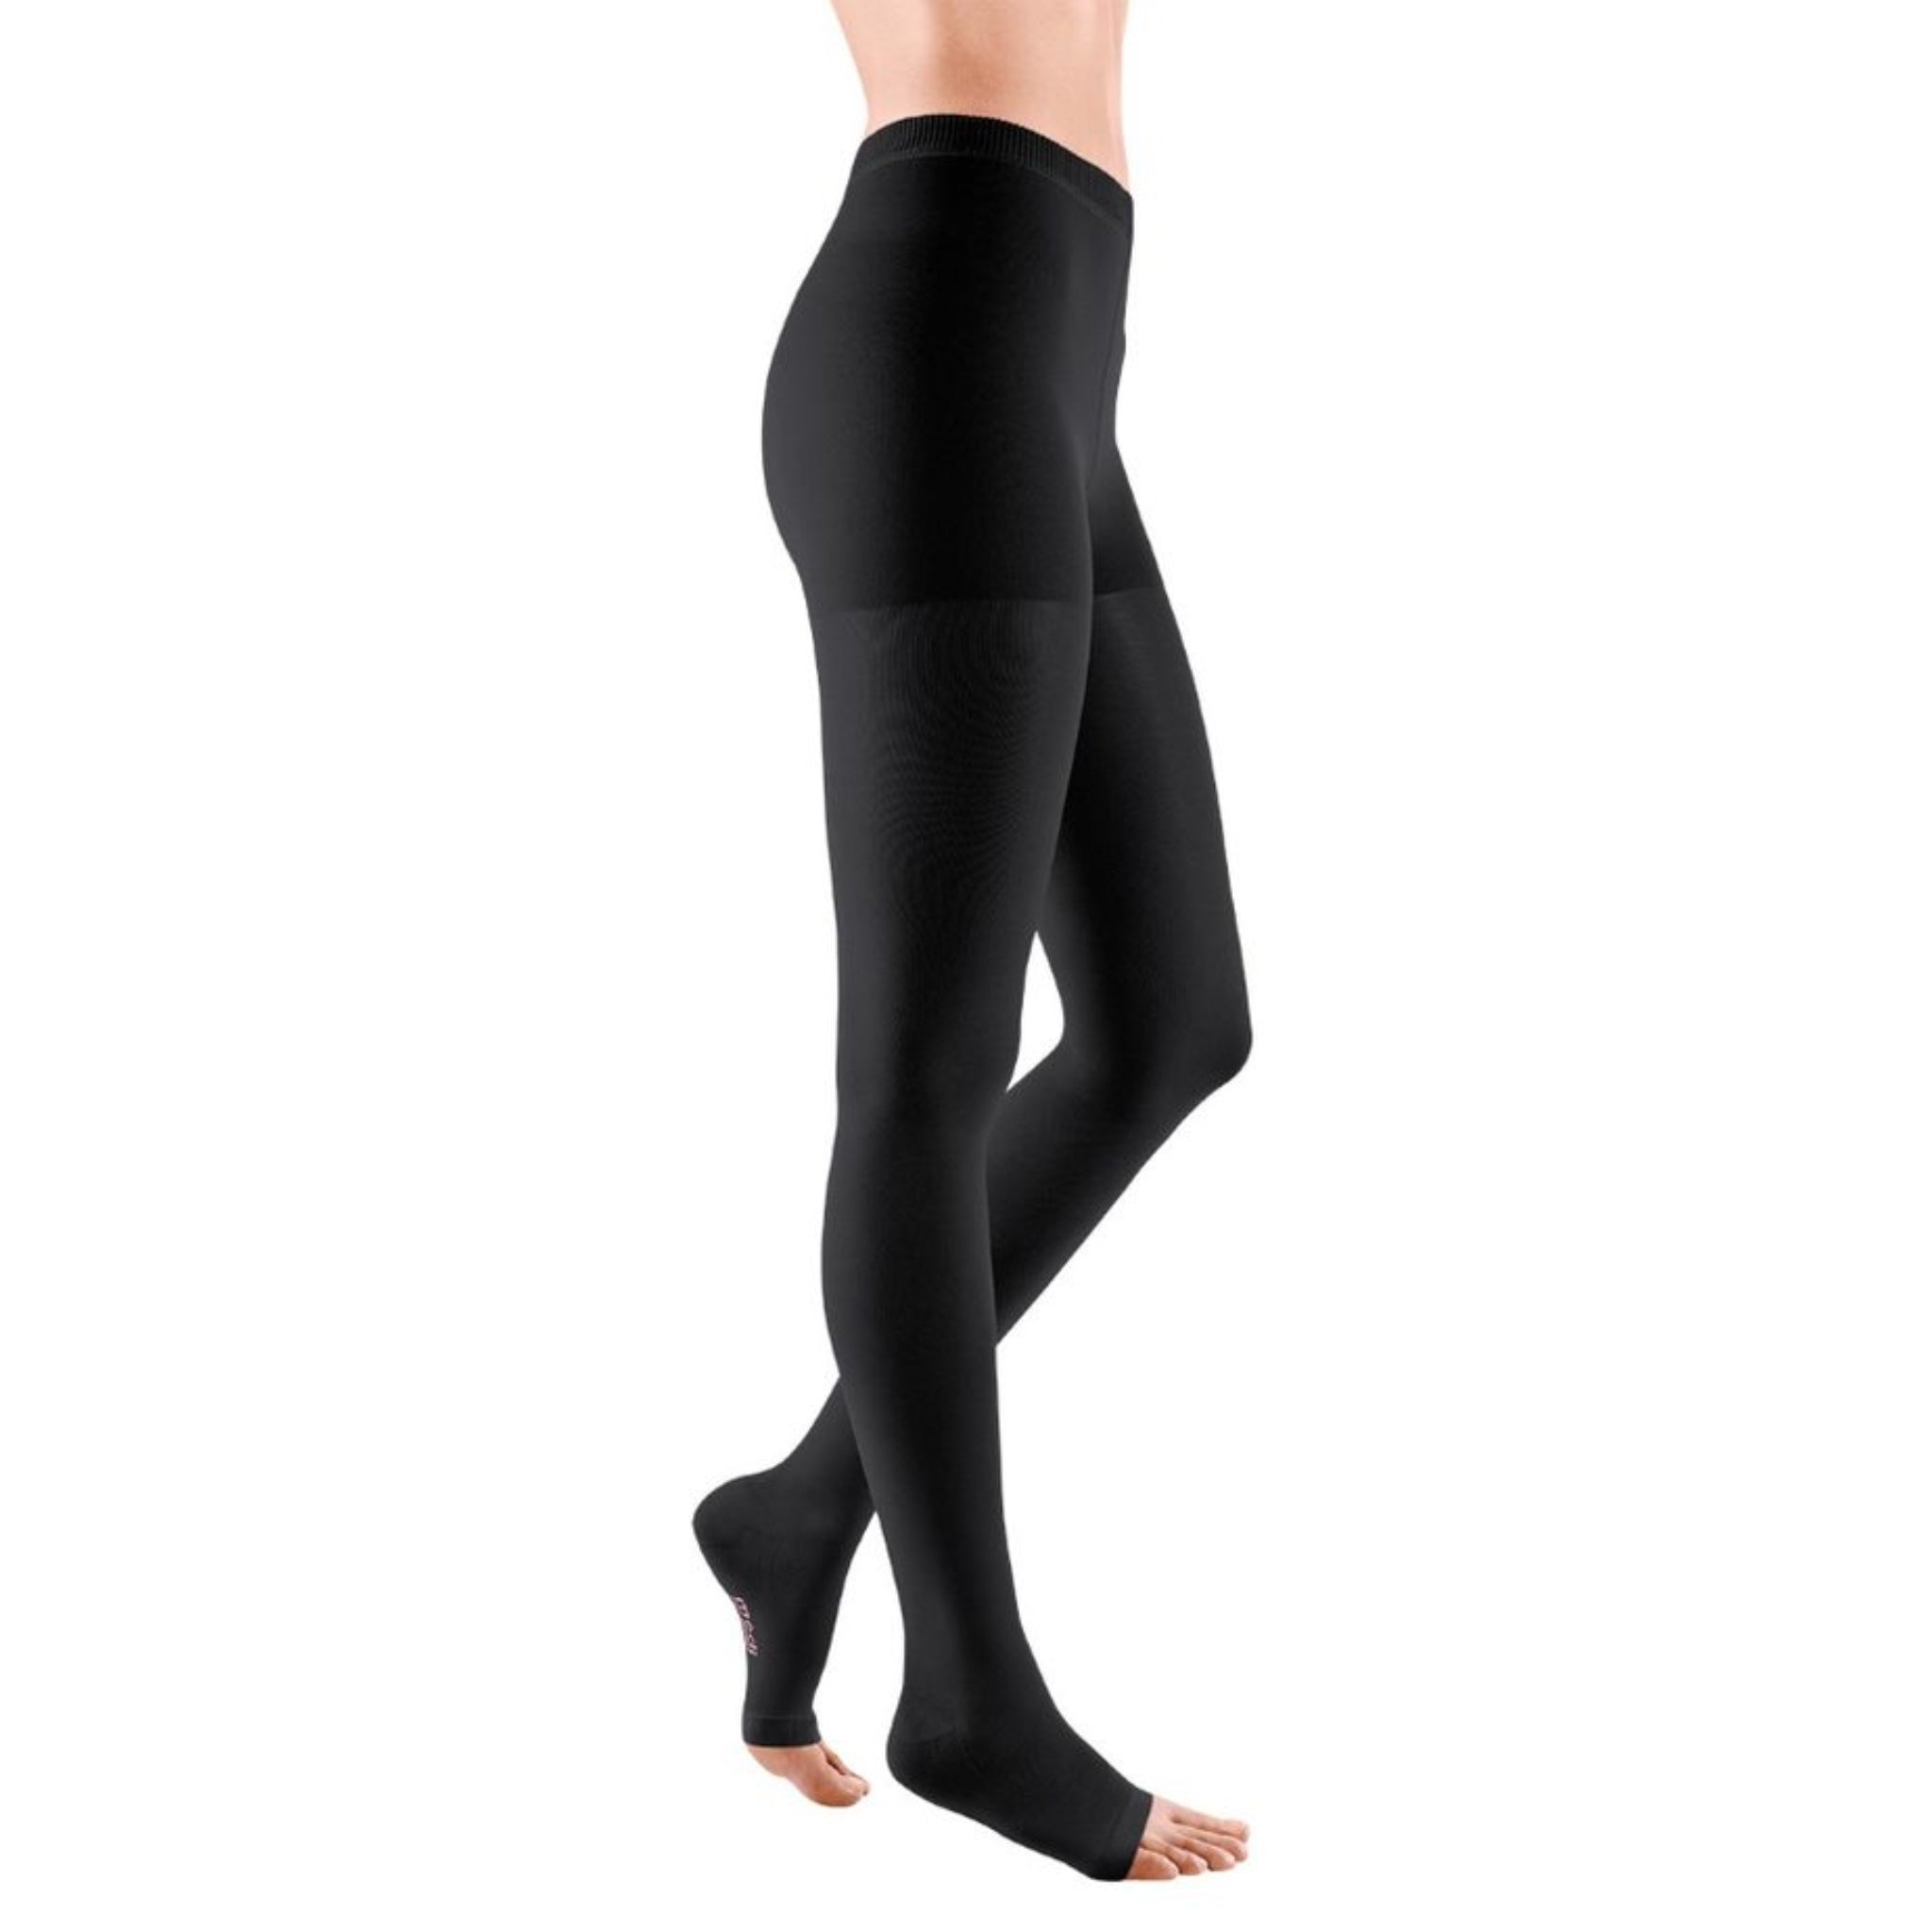 duomed®️Pantyhose  Compression Stockings